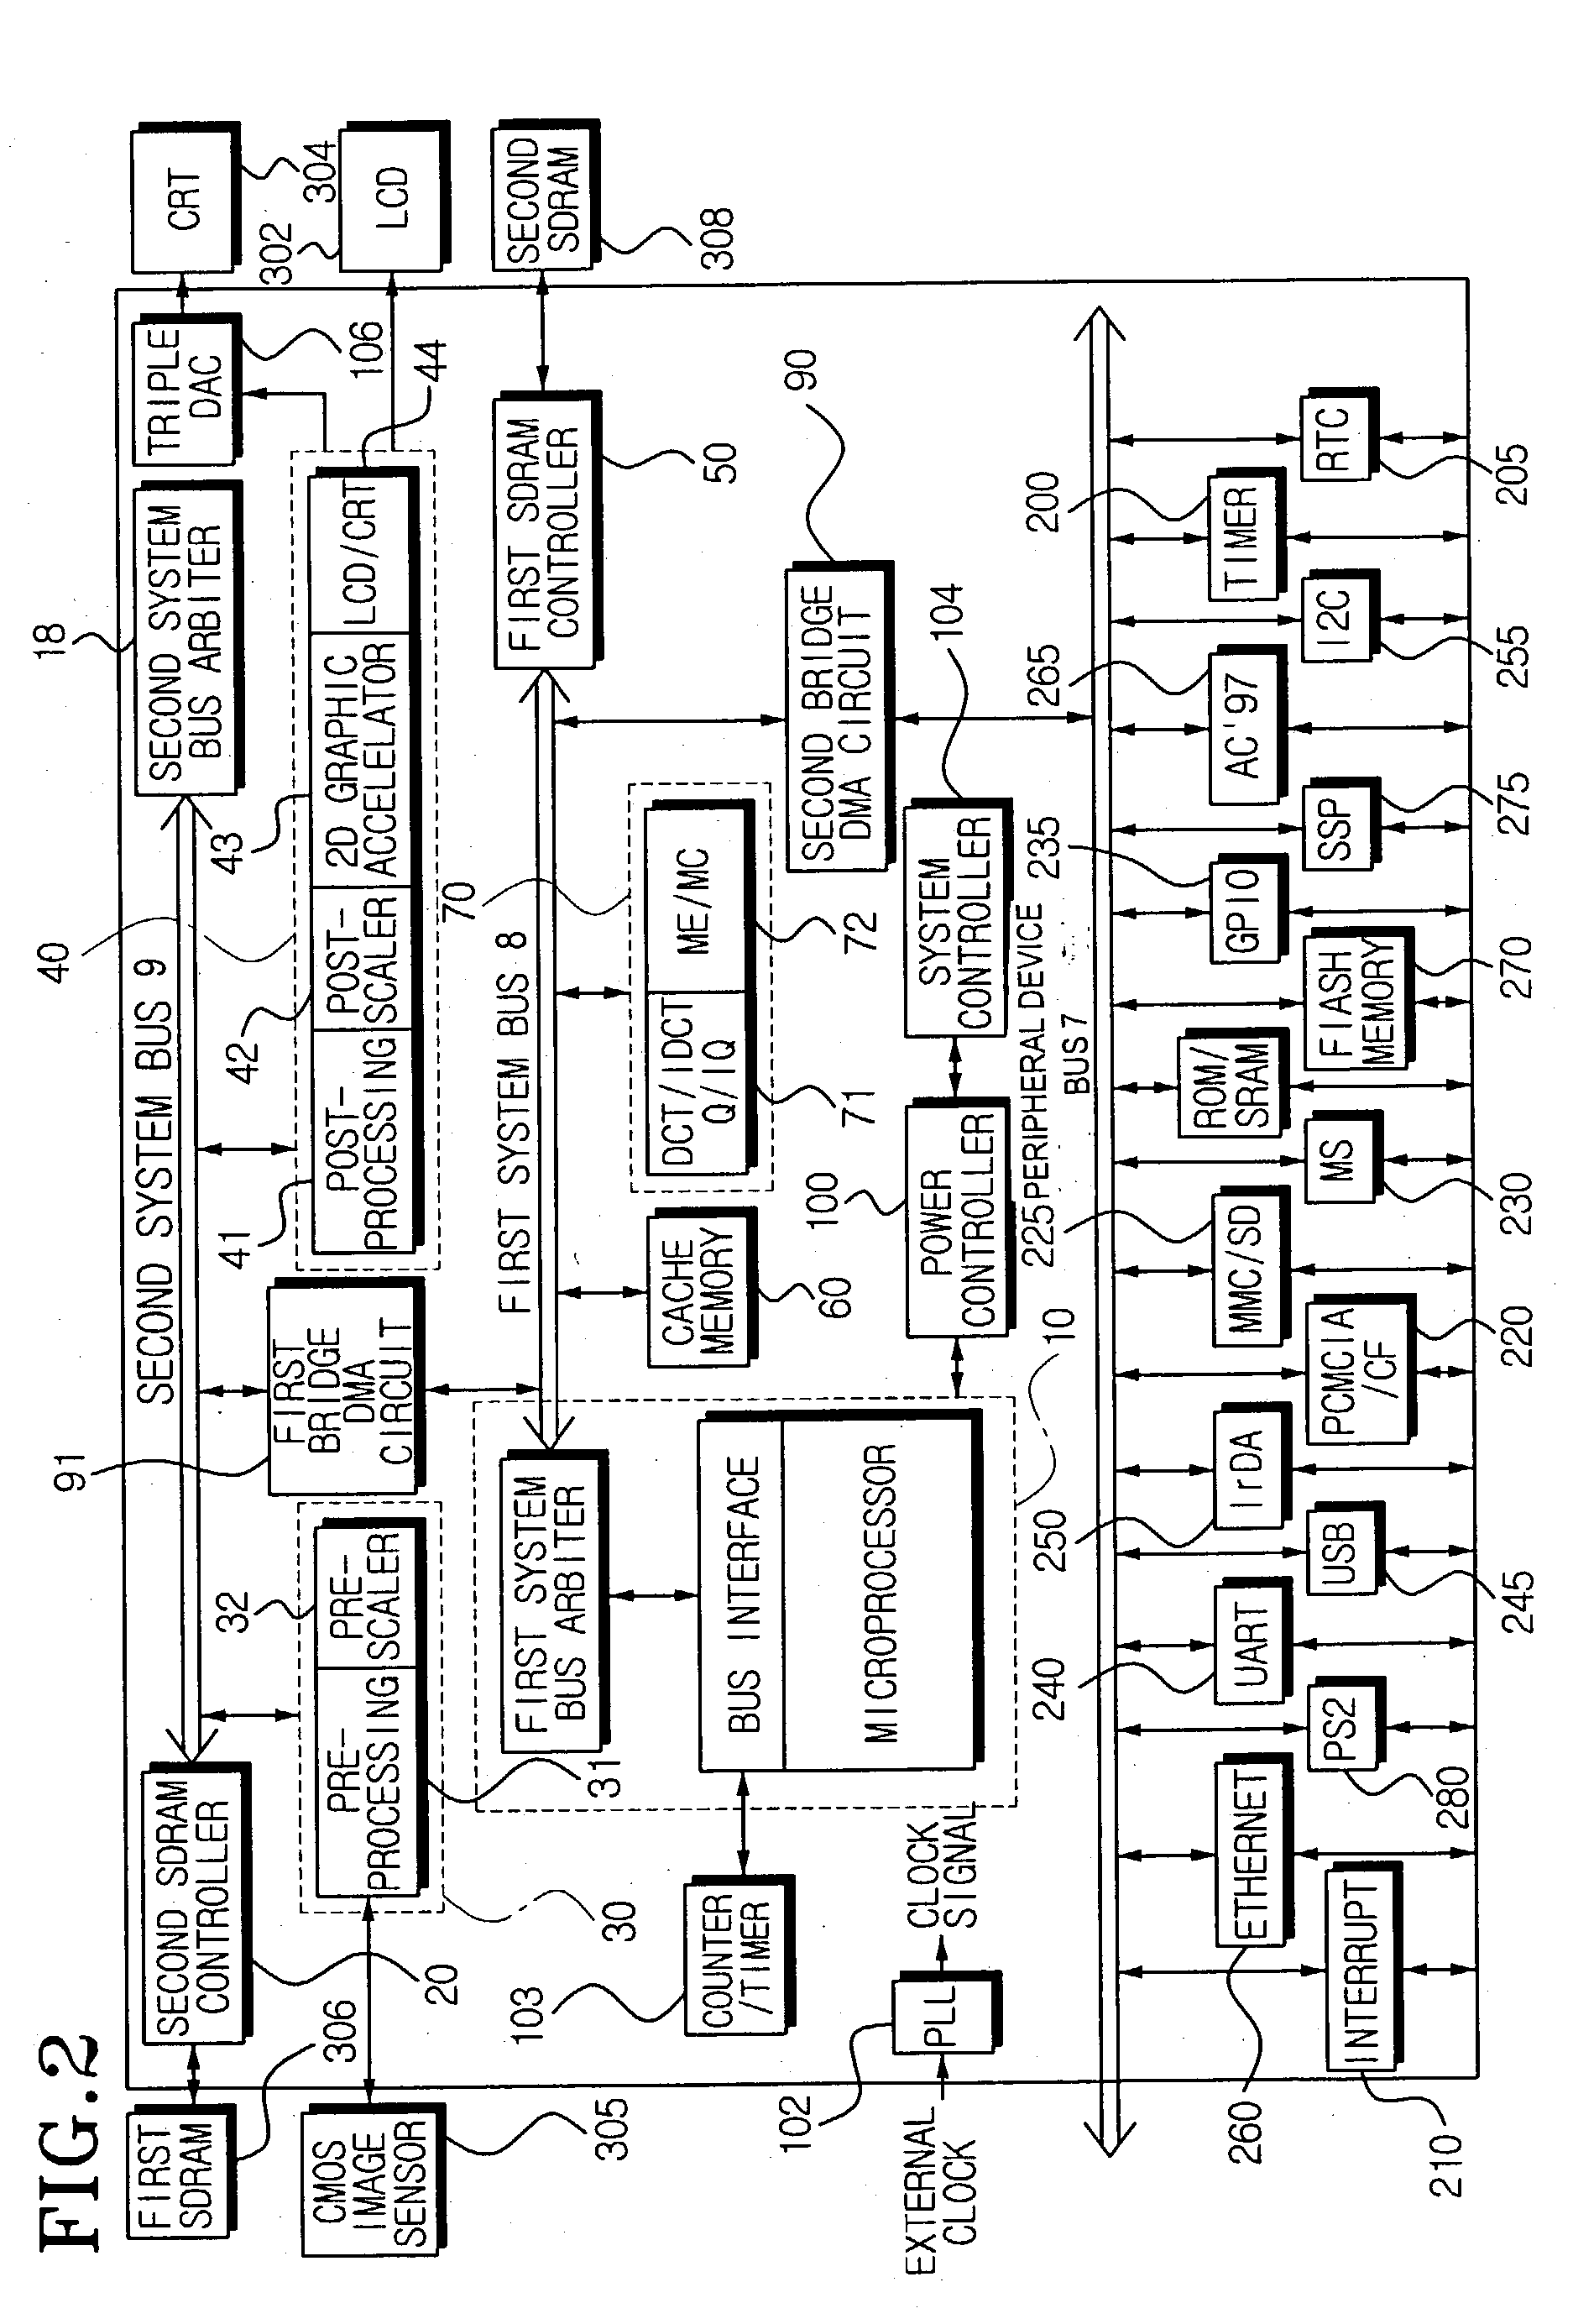 System on chip processor for multimedia devices